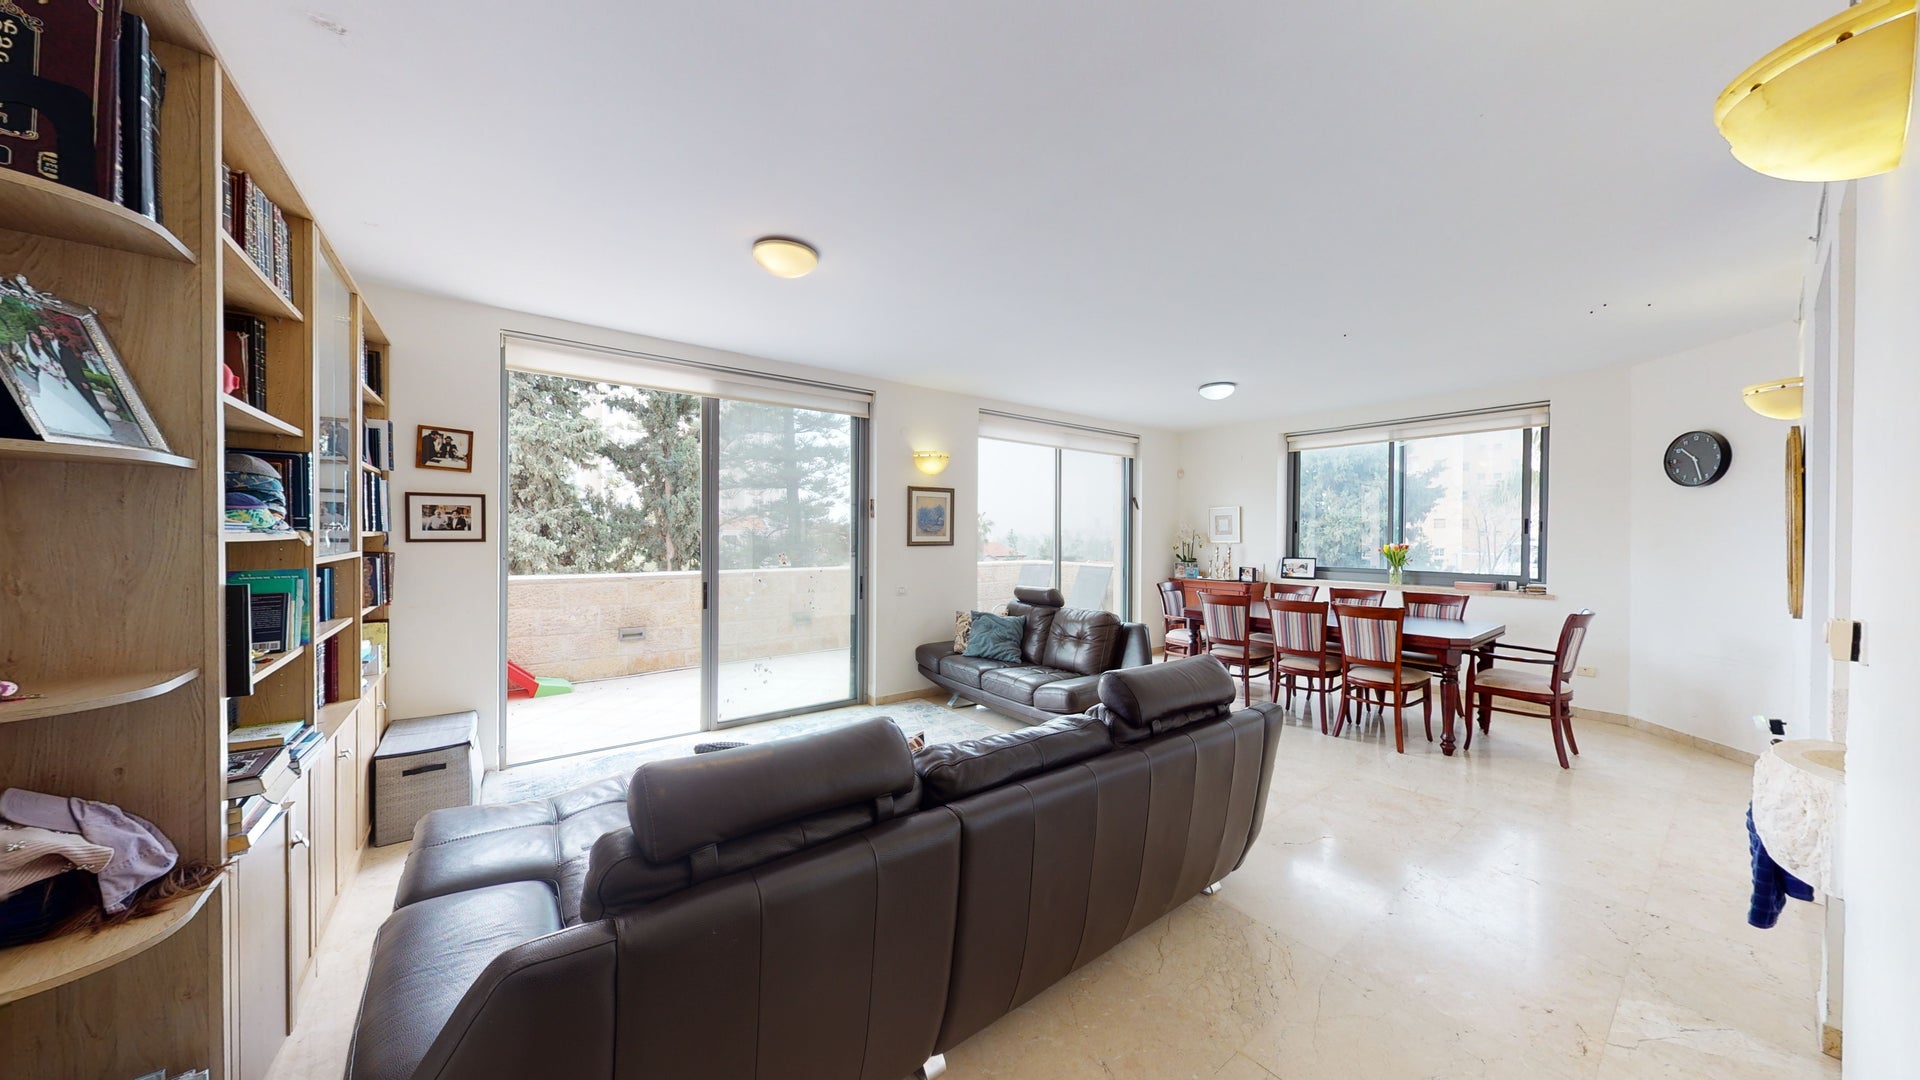 A Duplex Penthouse in the heart of the Shaarei Chesed neighborhood